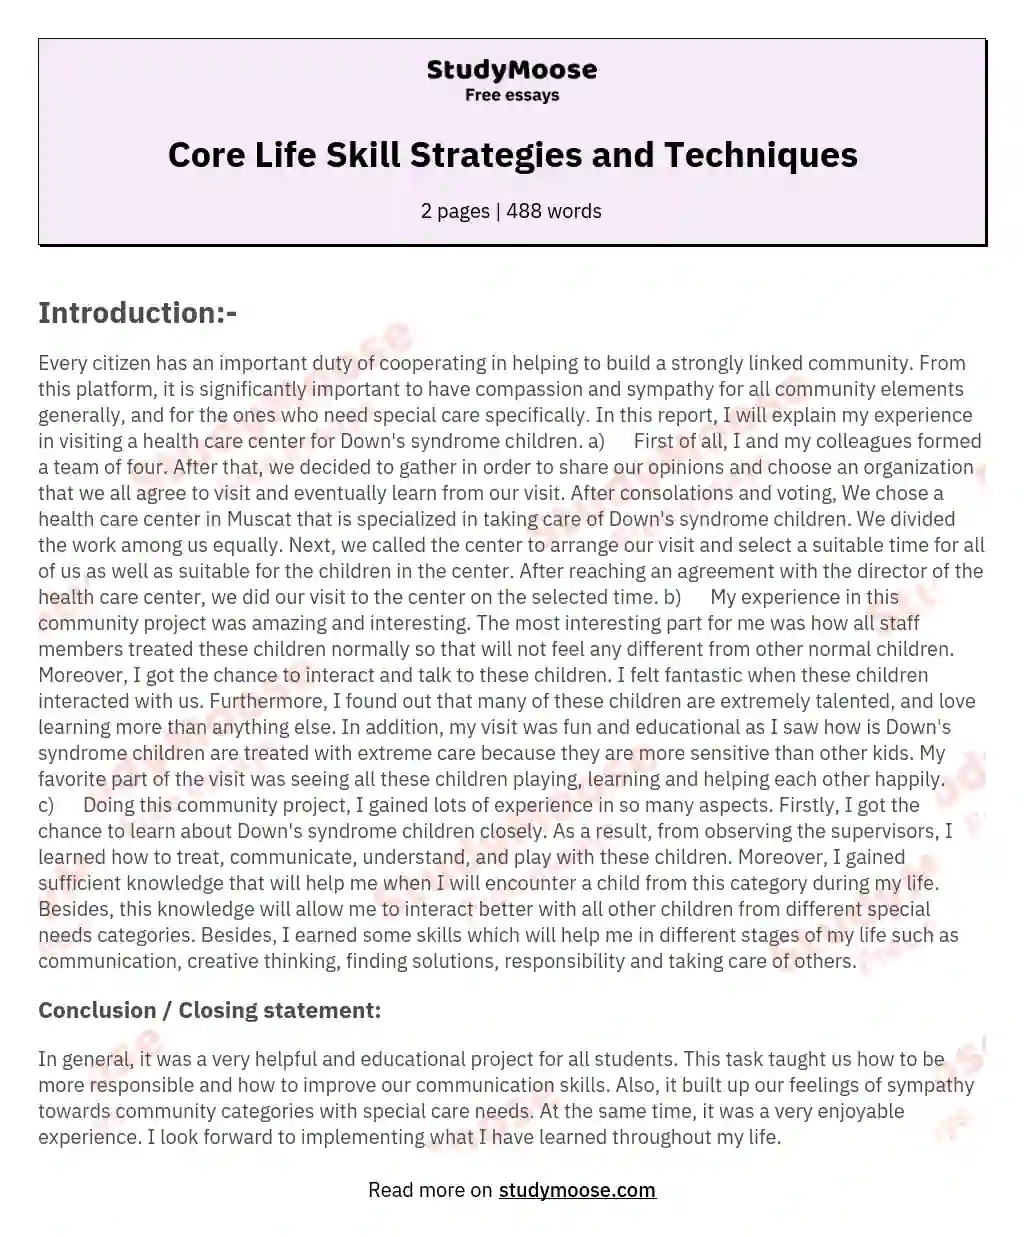 Core Life Skill Strategies and Techniques